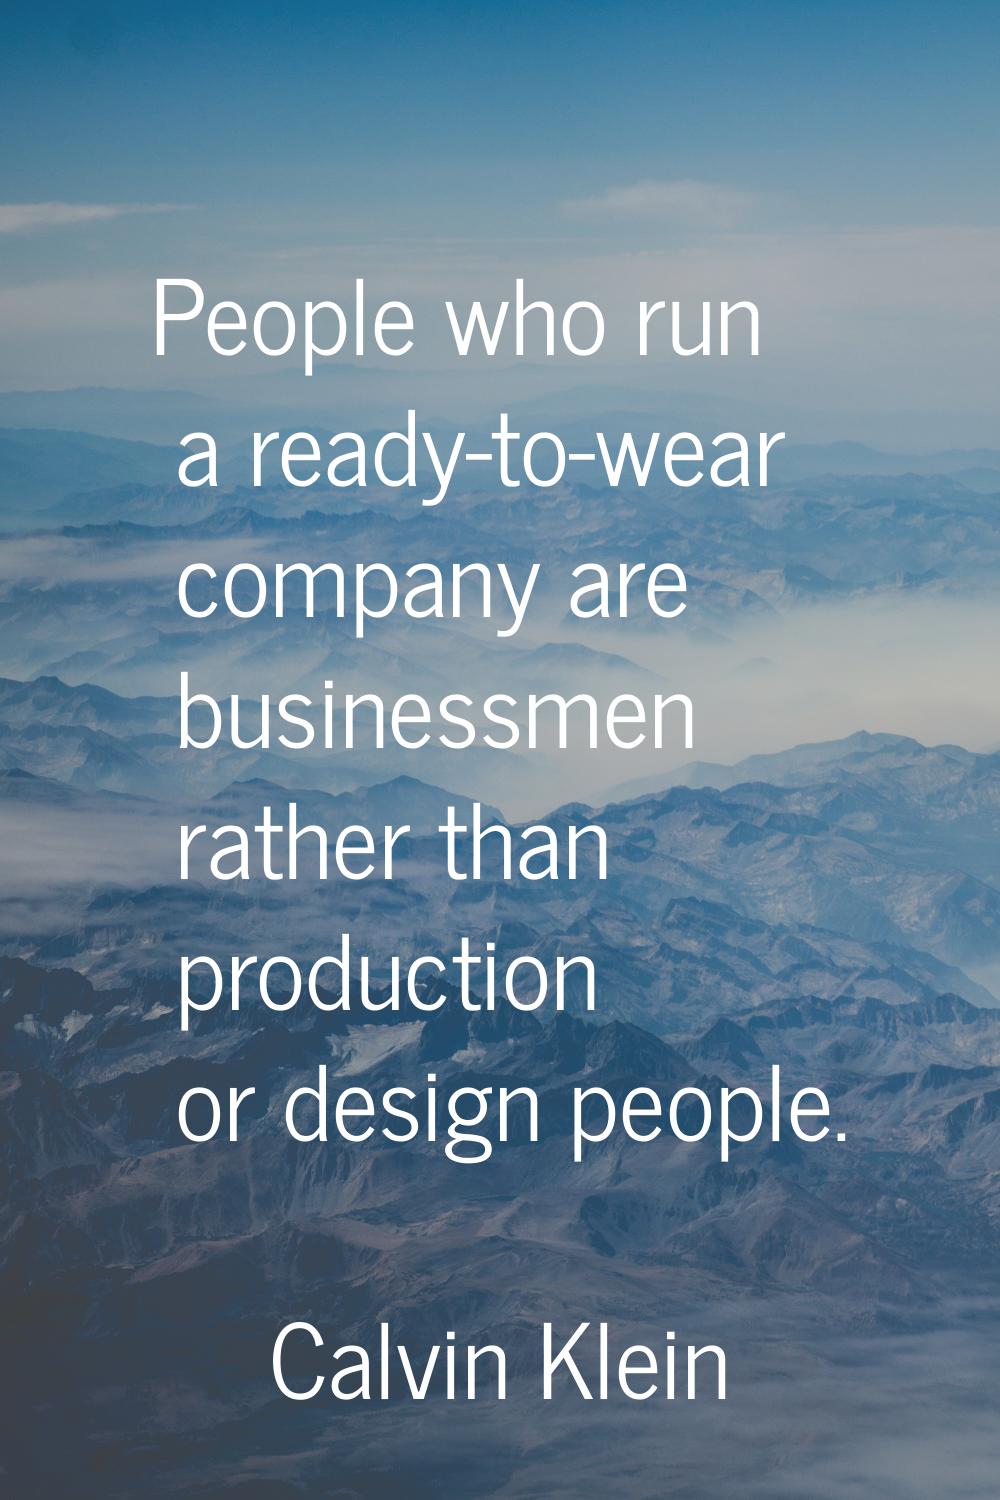 People who run a ready-to-wear company are businessmen rather than production or design people.